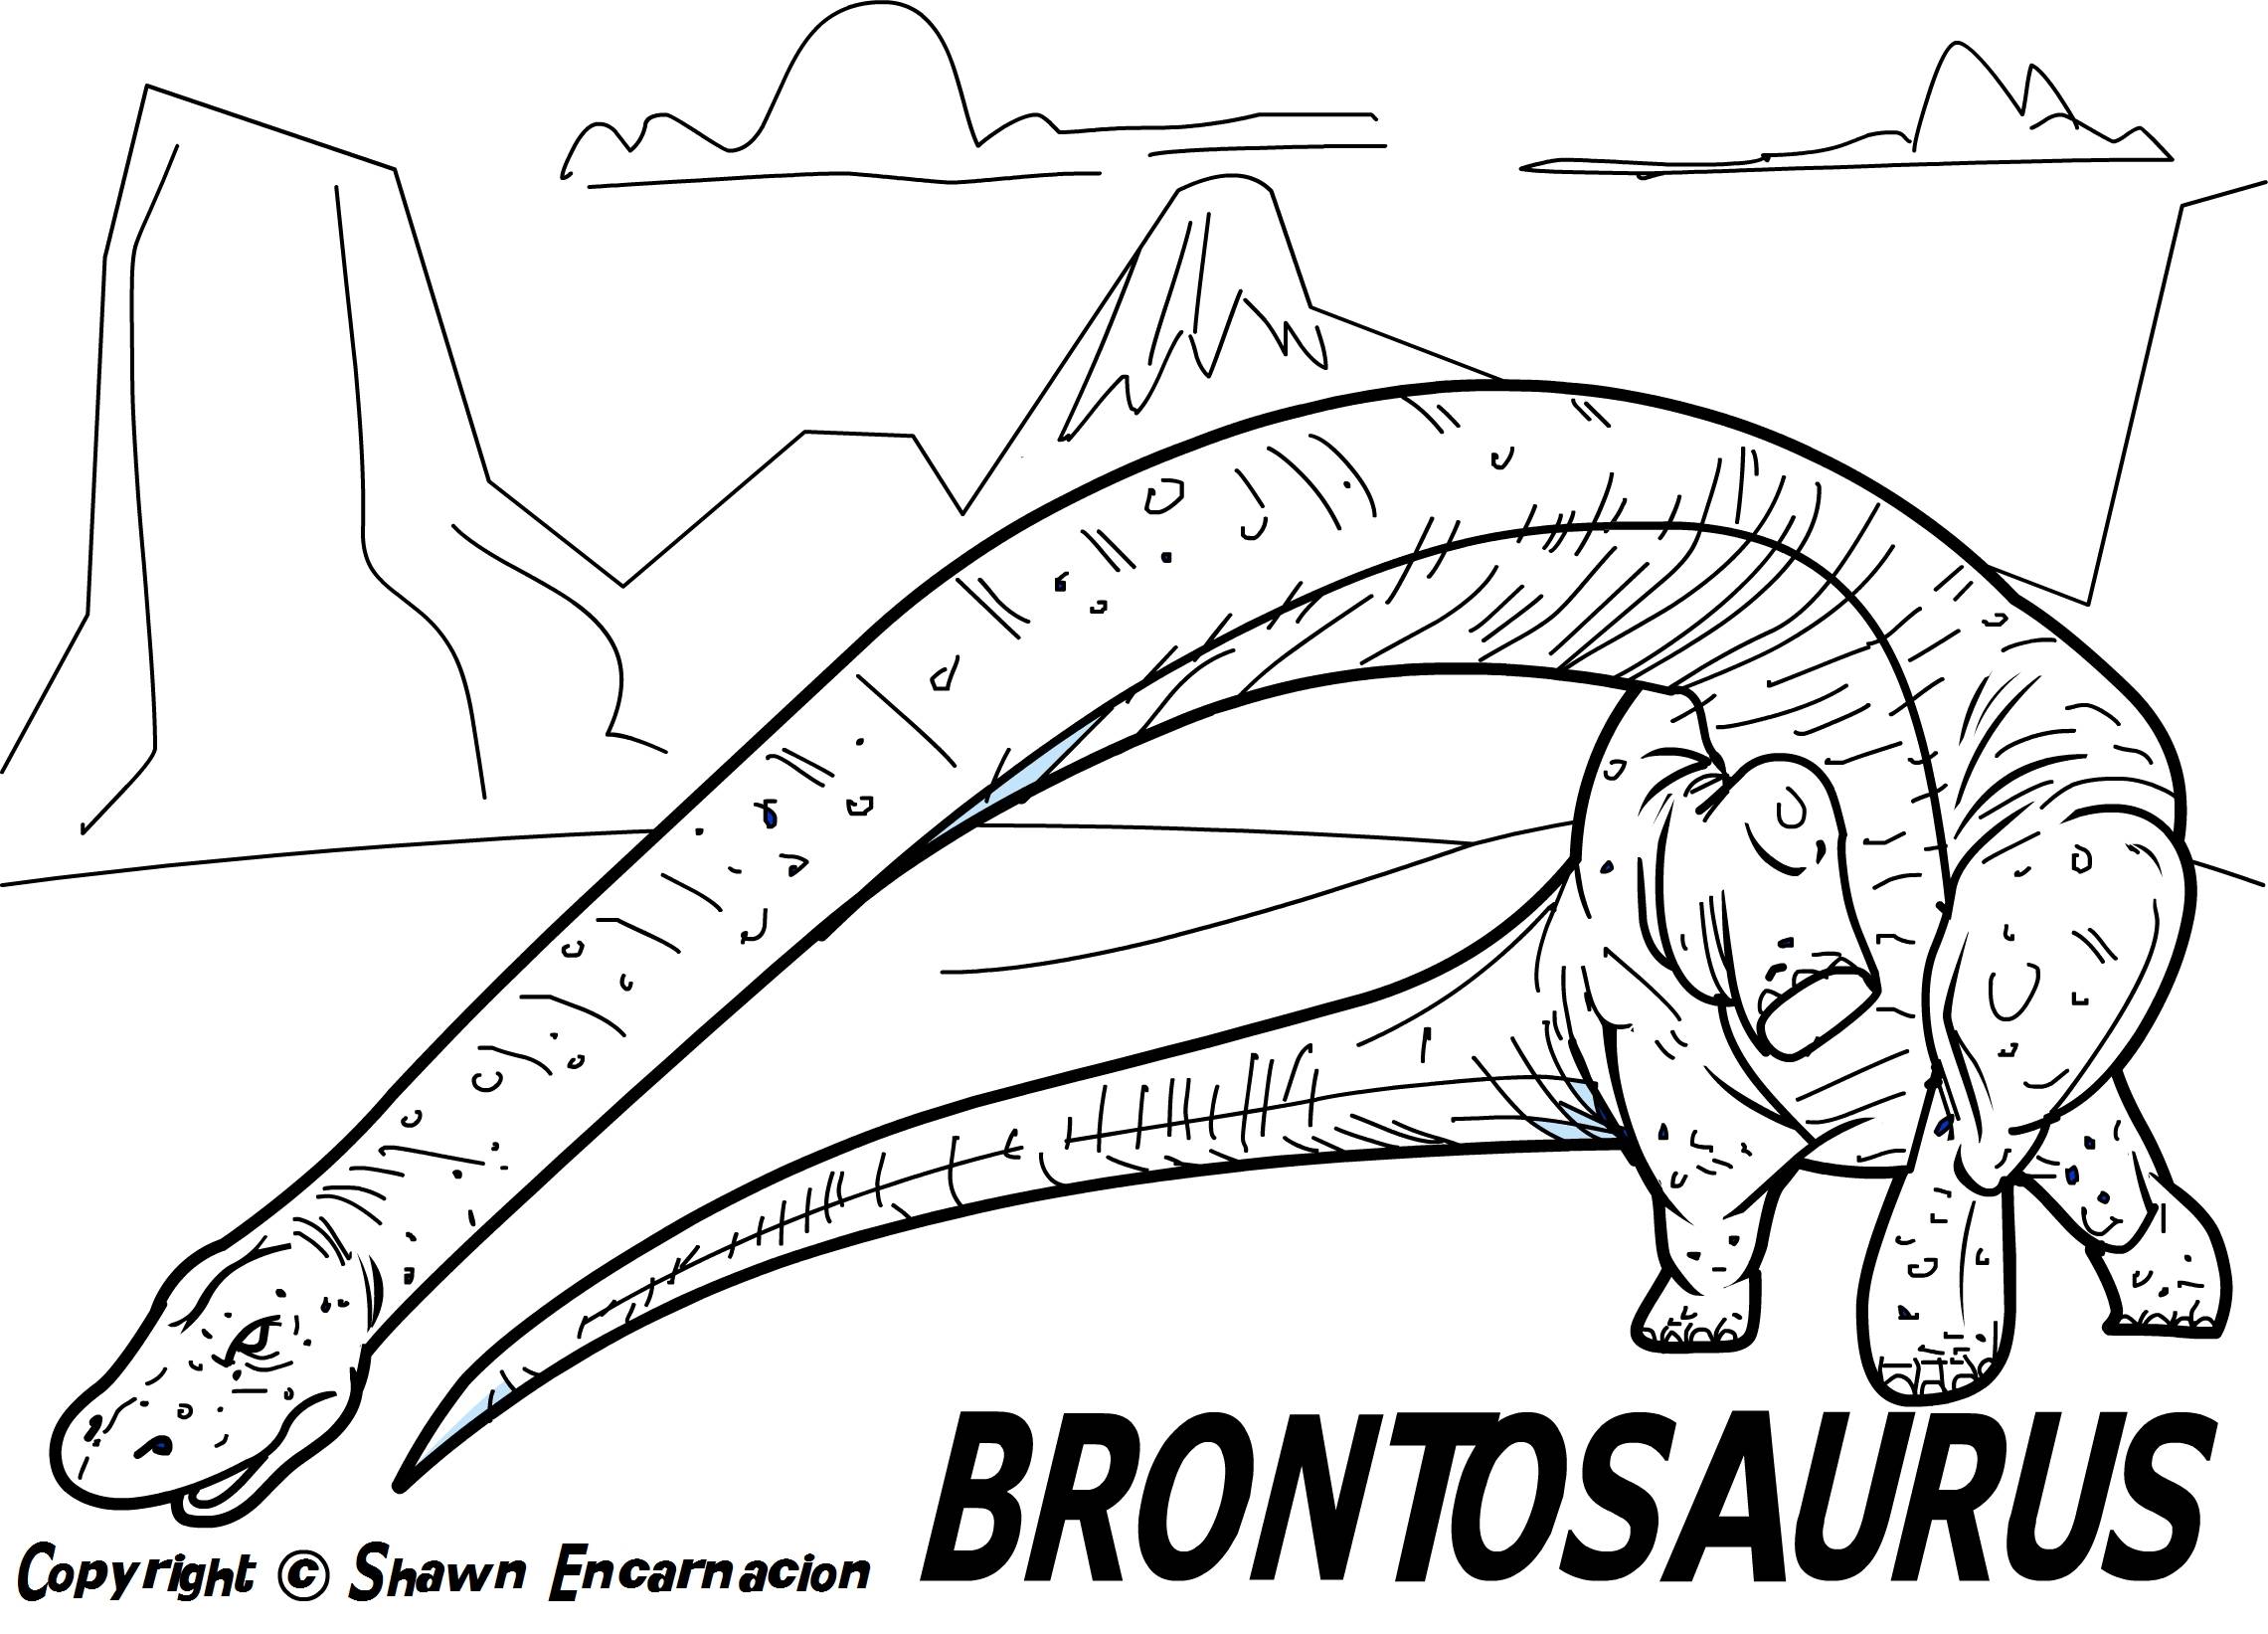 Terrible Lizards Dinosaurs coloring pages 17 Pictures and cliparts